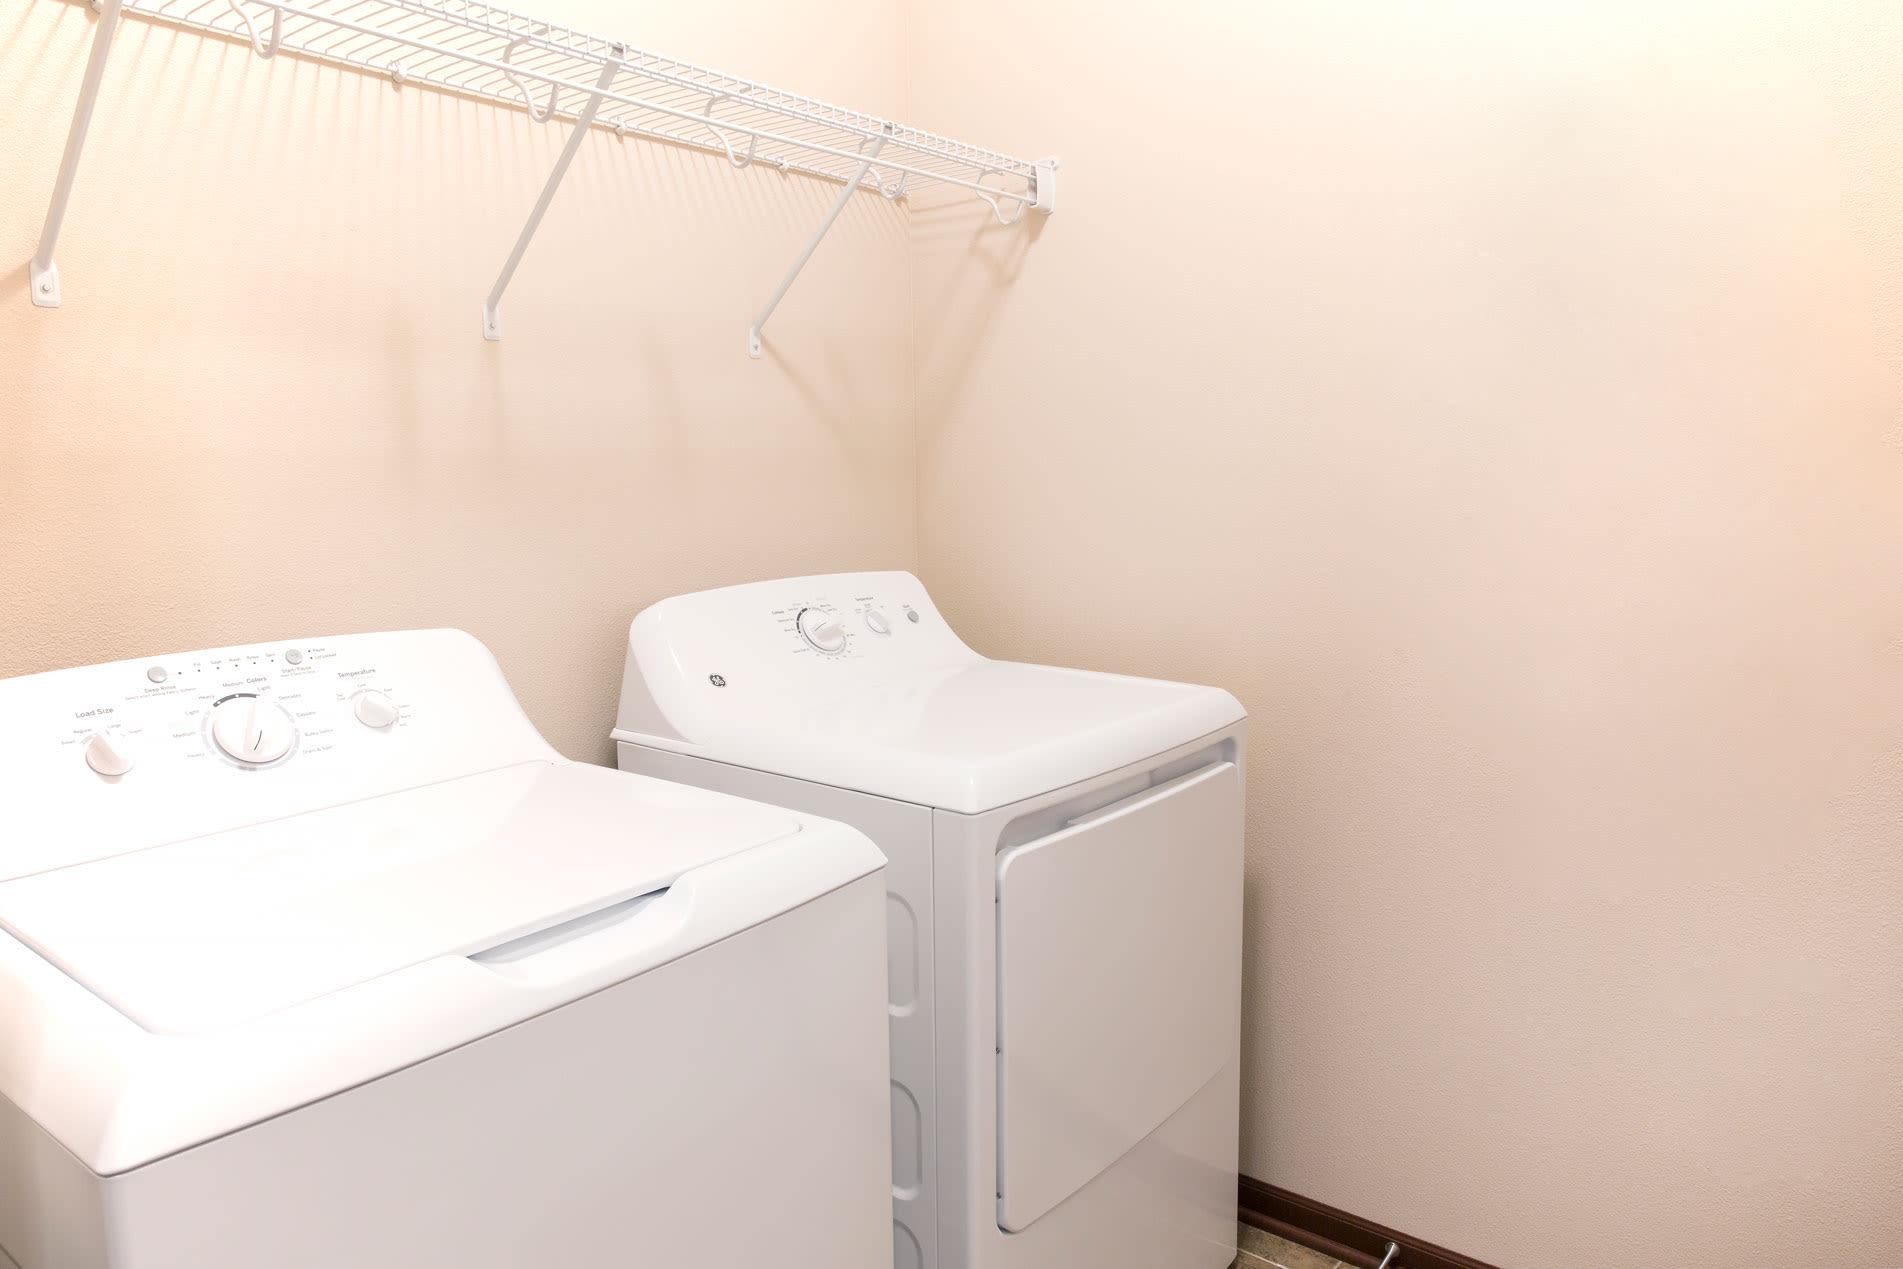 In-unit washers and dryers at Prairie Pointe Student Living in Ankeny, Iowa